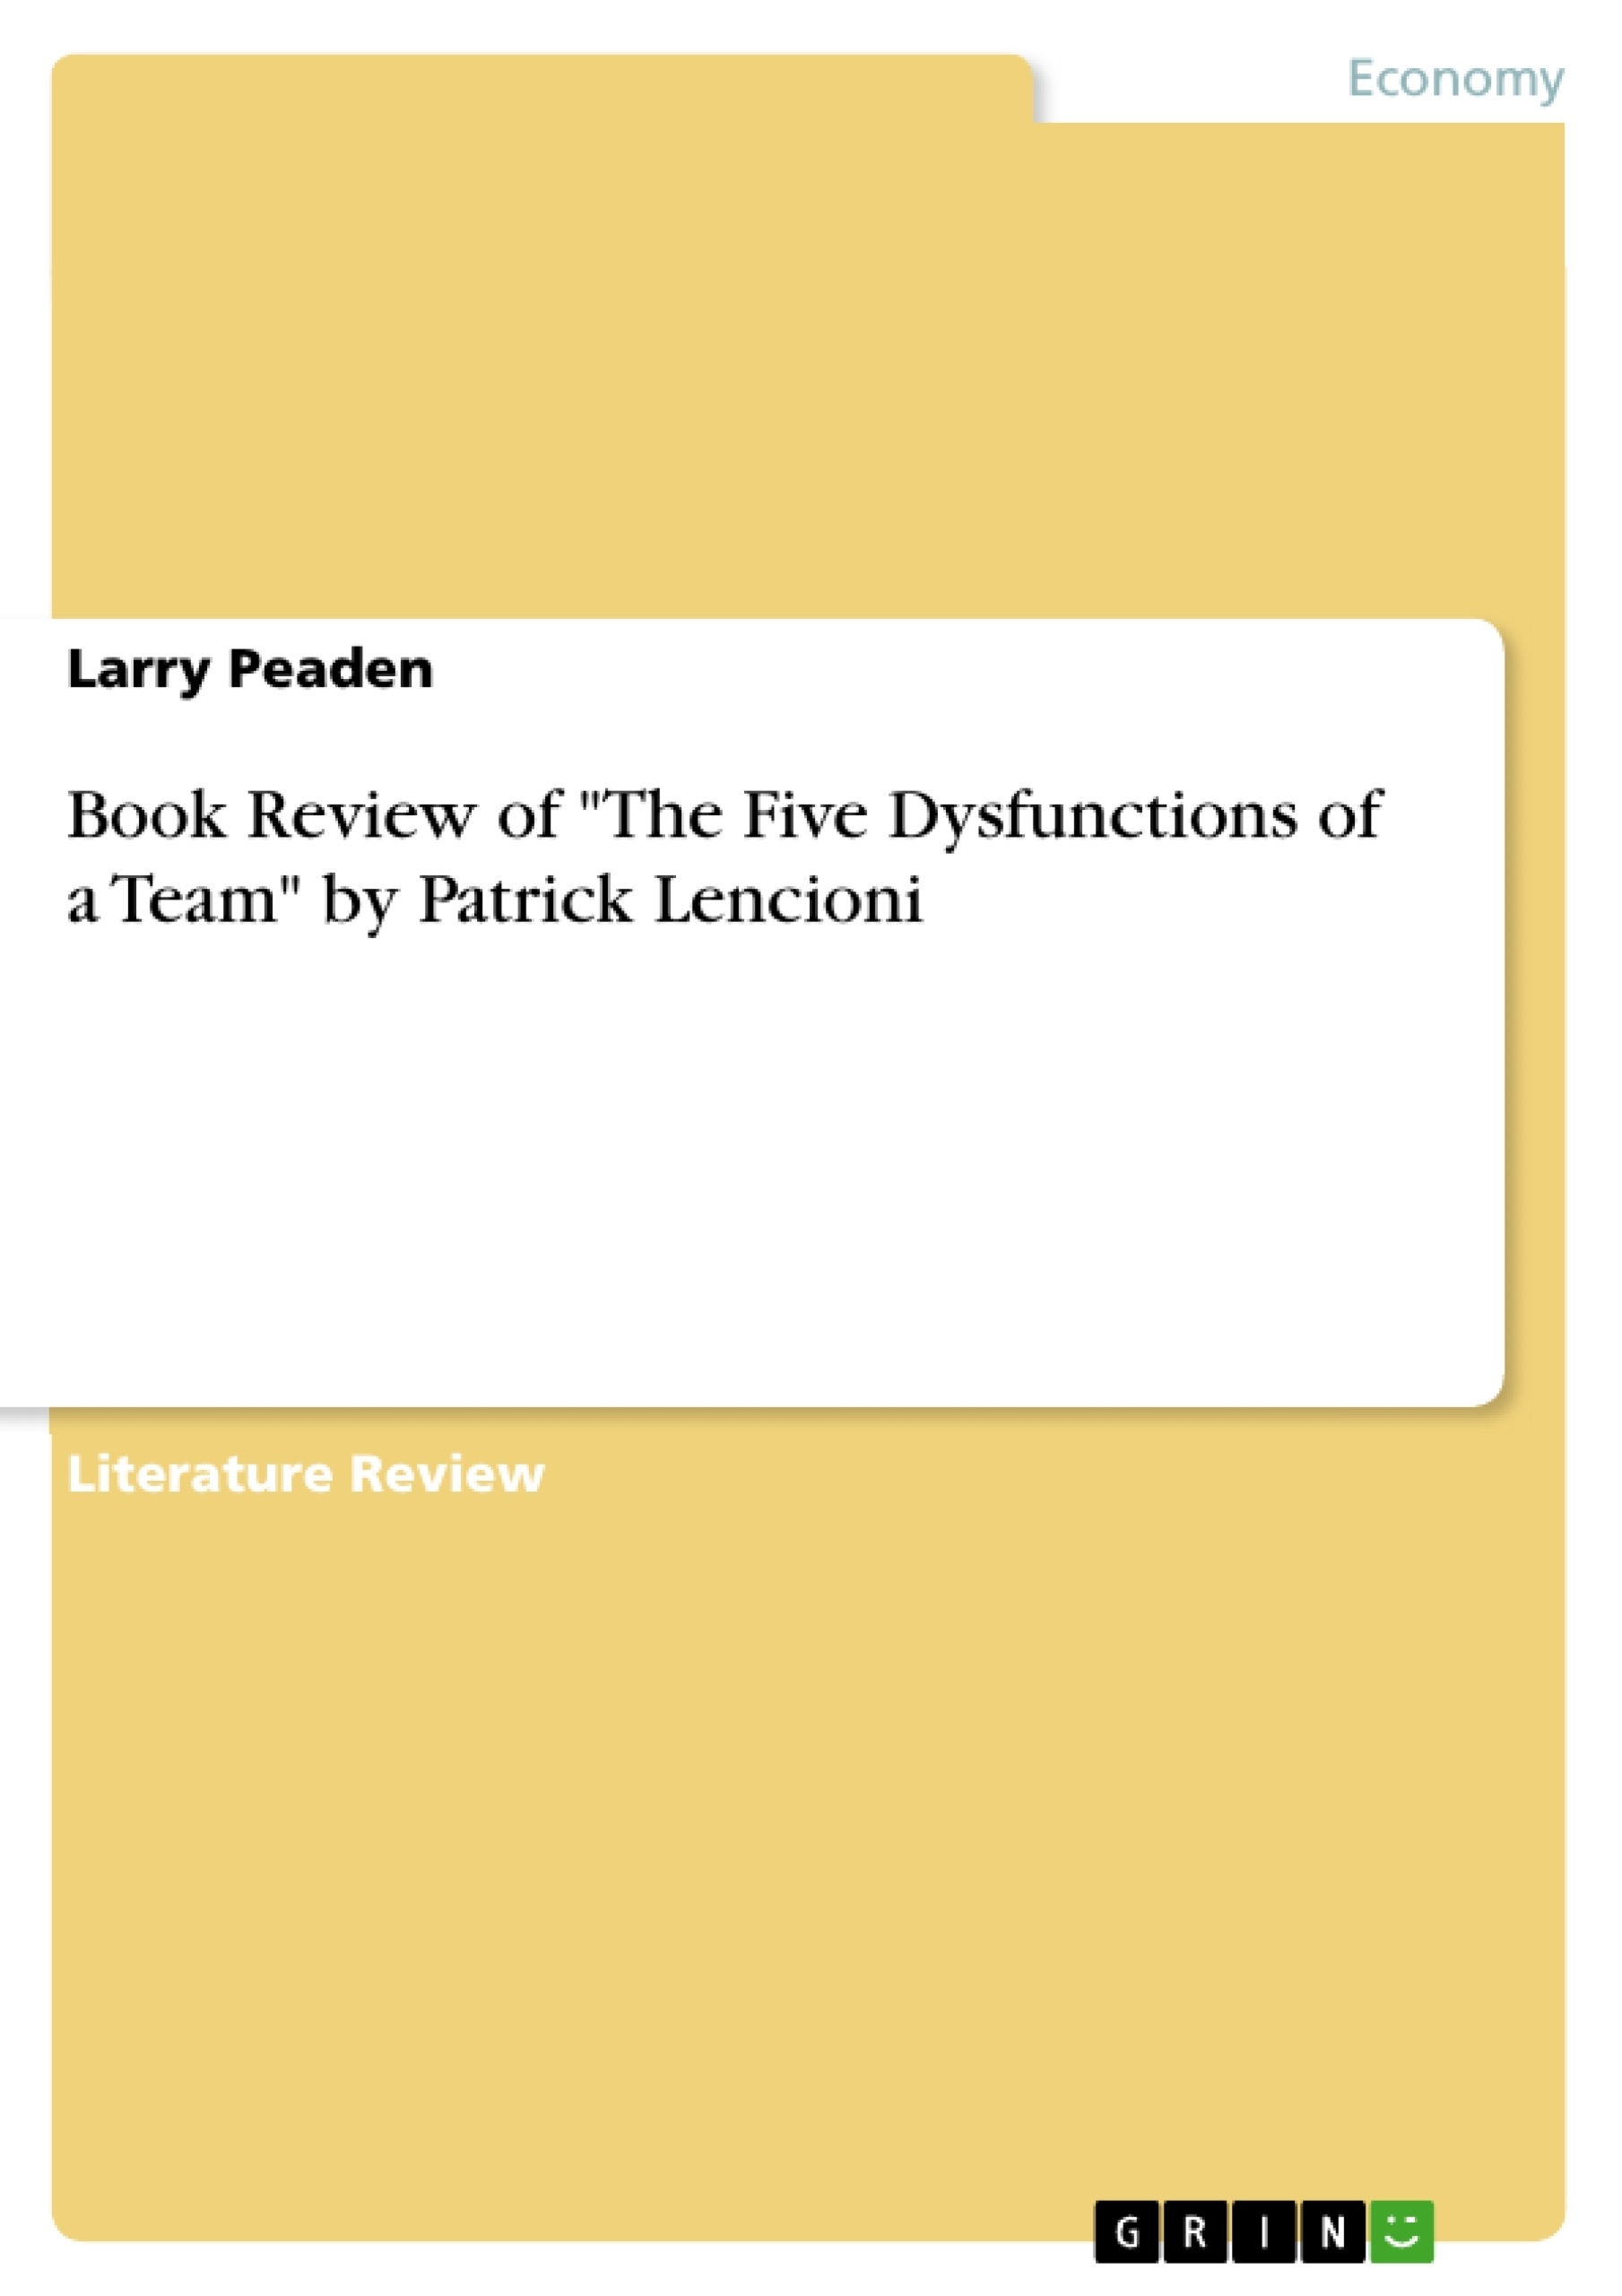 Title: Book Review of "The Five Dysfunctions of a Team" by Patrick Lencioni